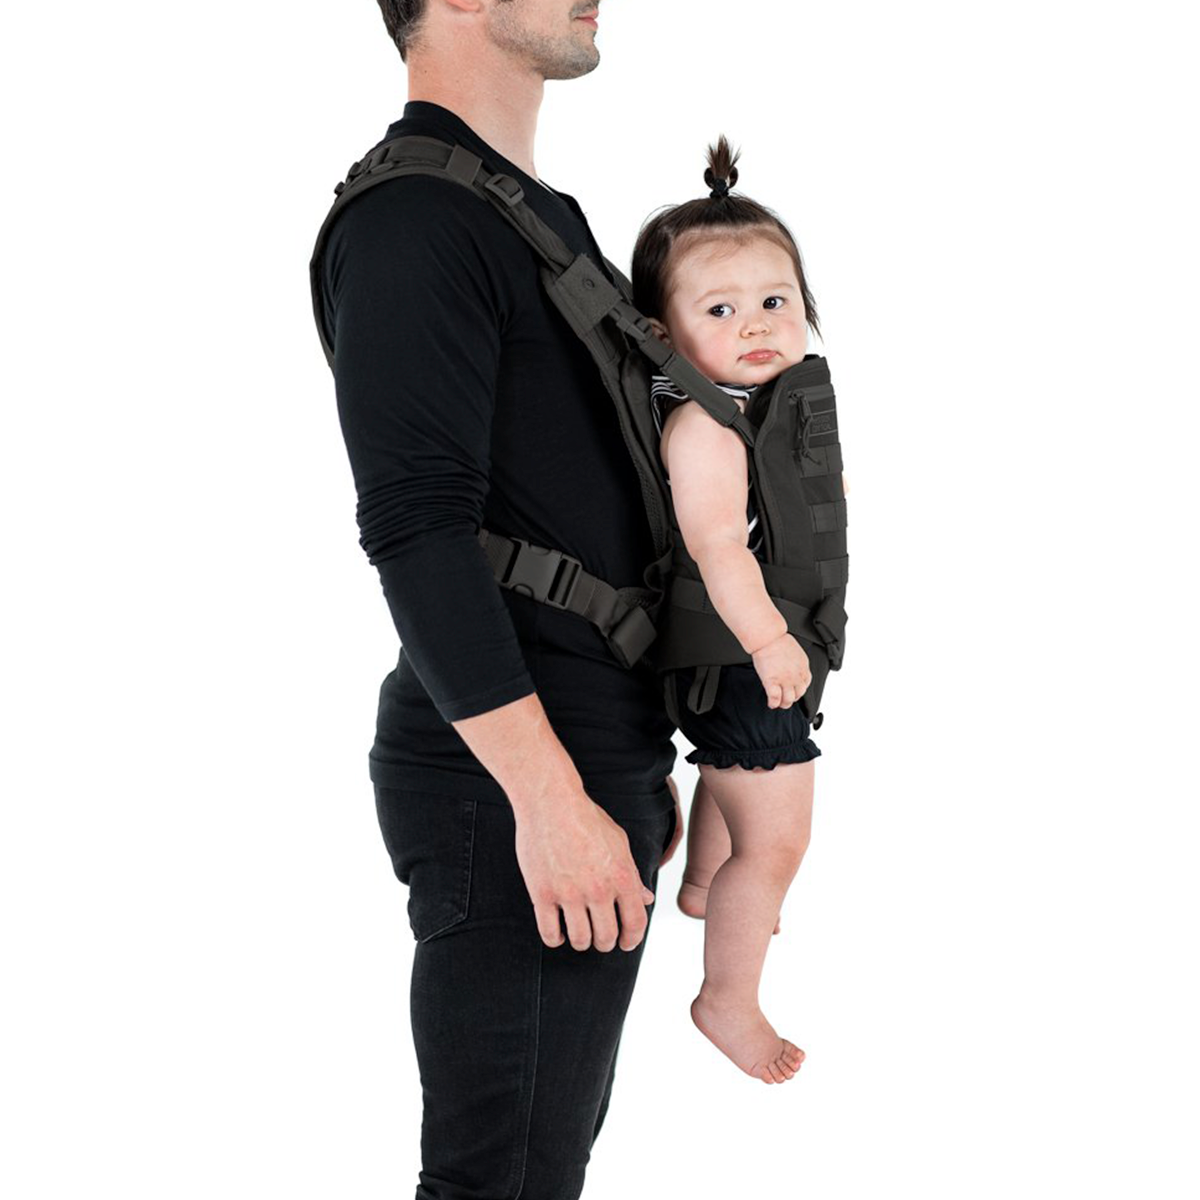 S.01 Action Baby Carrier™